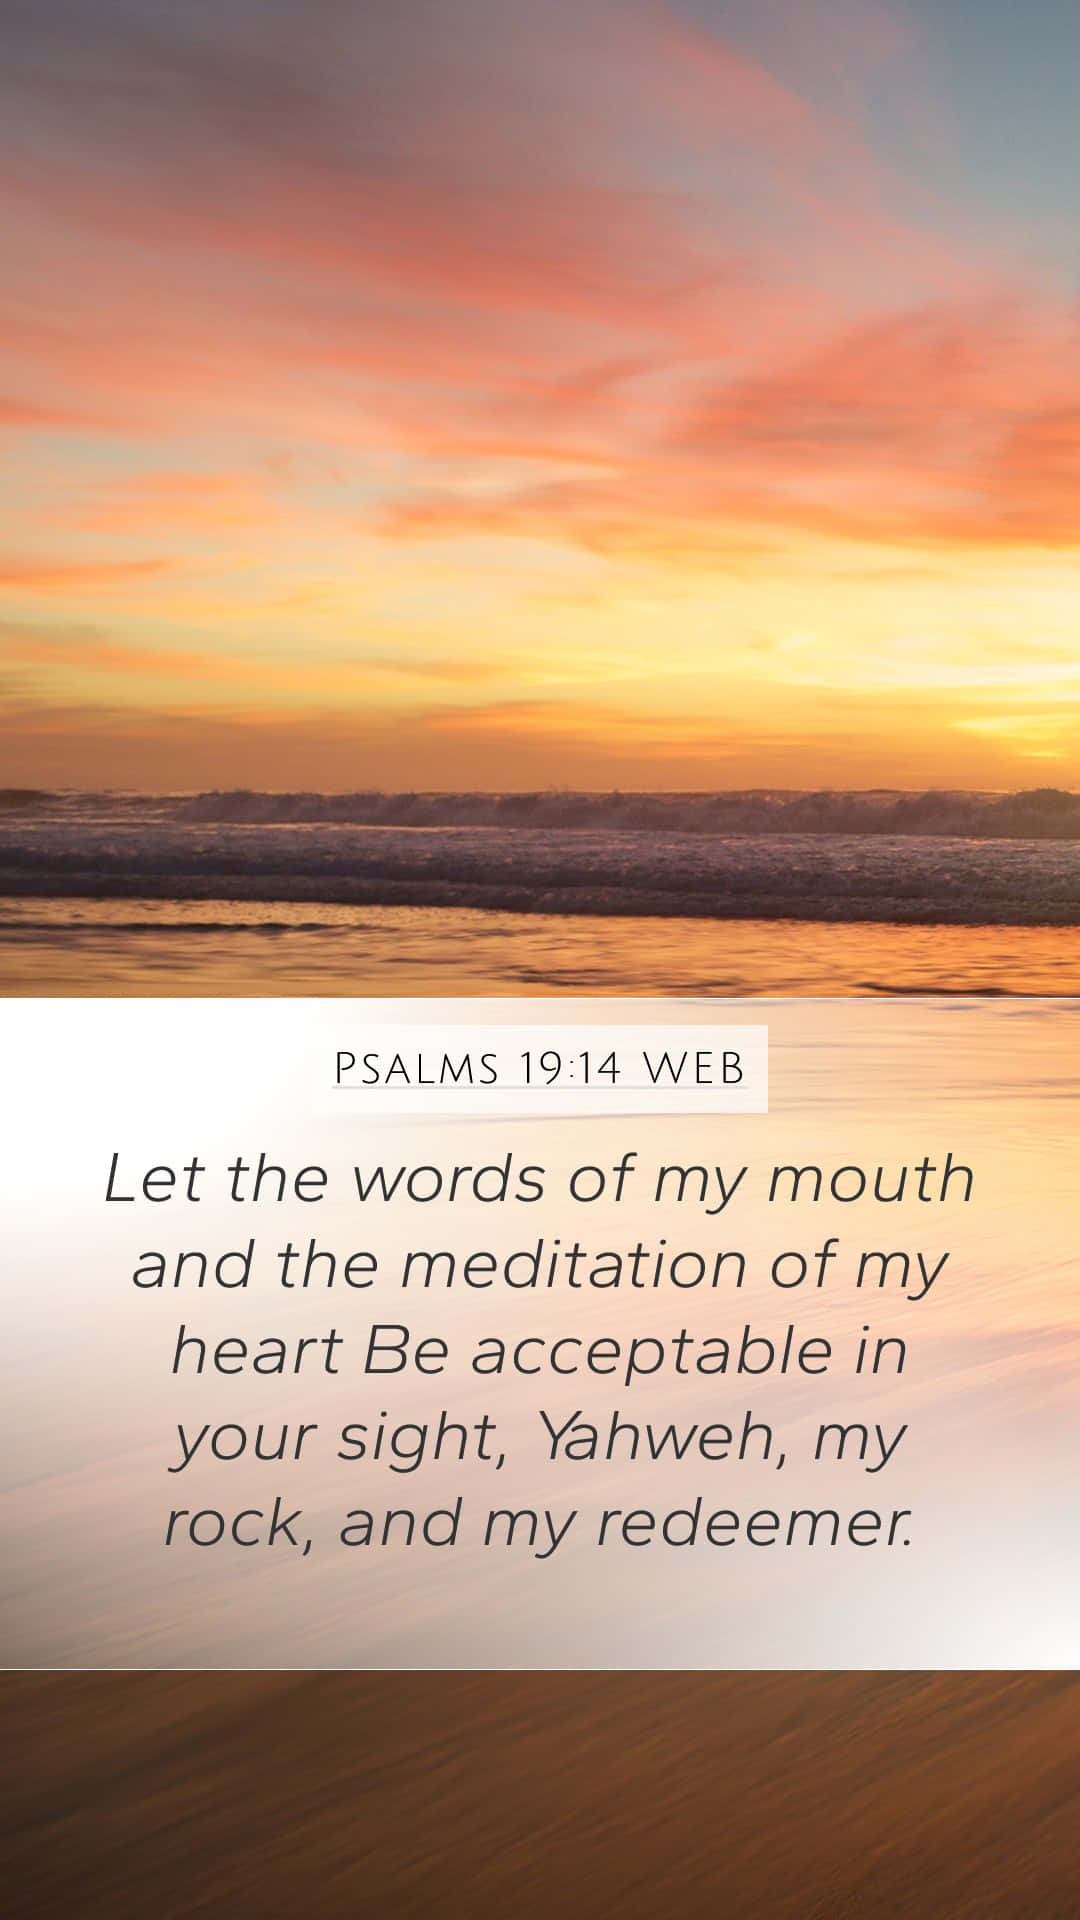 A Sunset With The Words Psalms To My Web Wallpaper